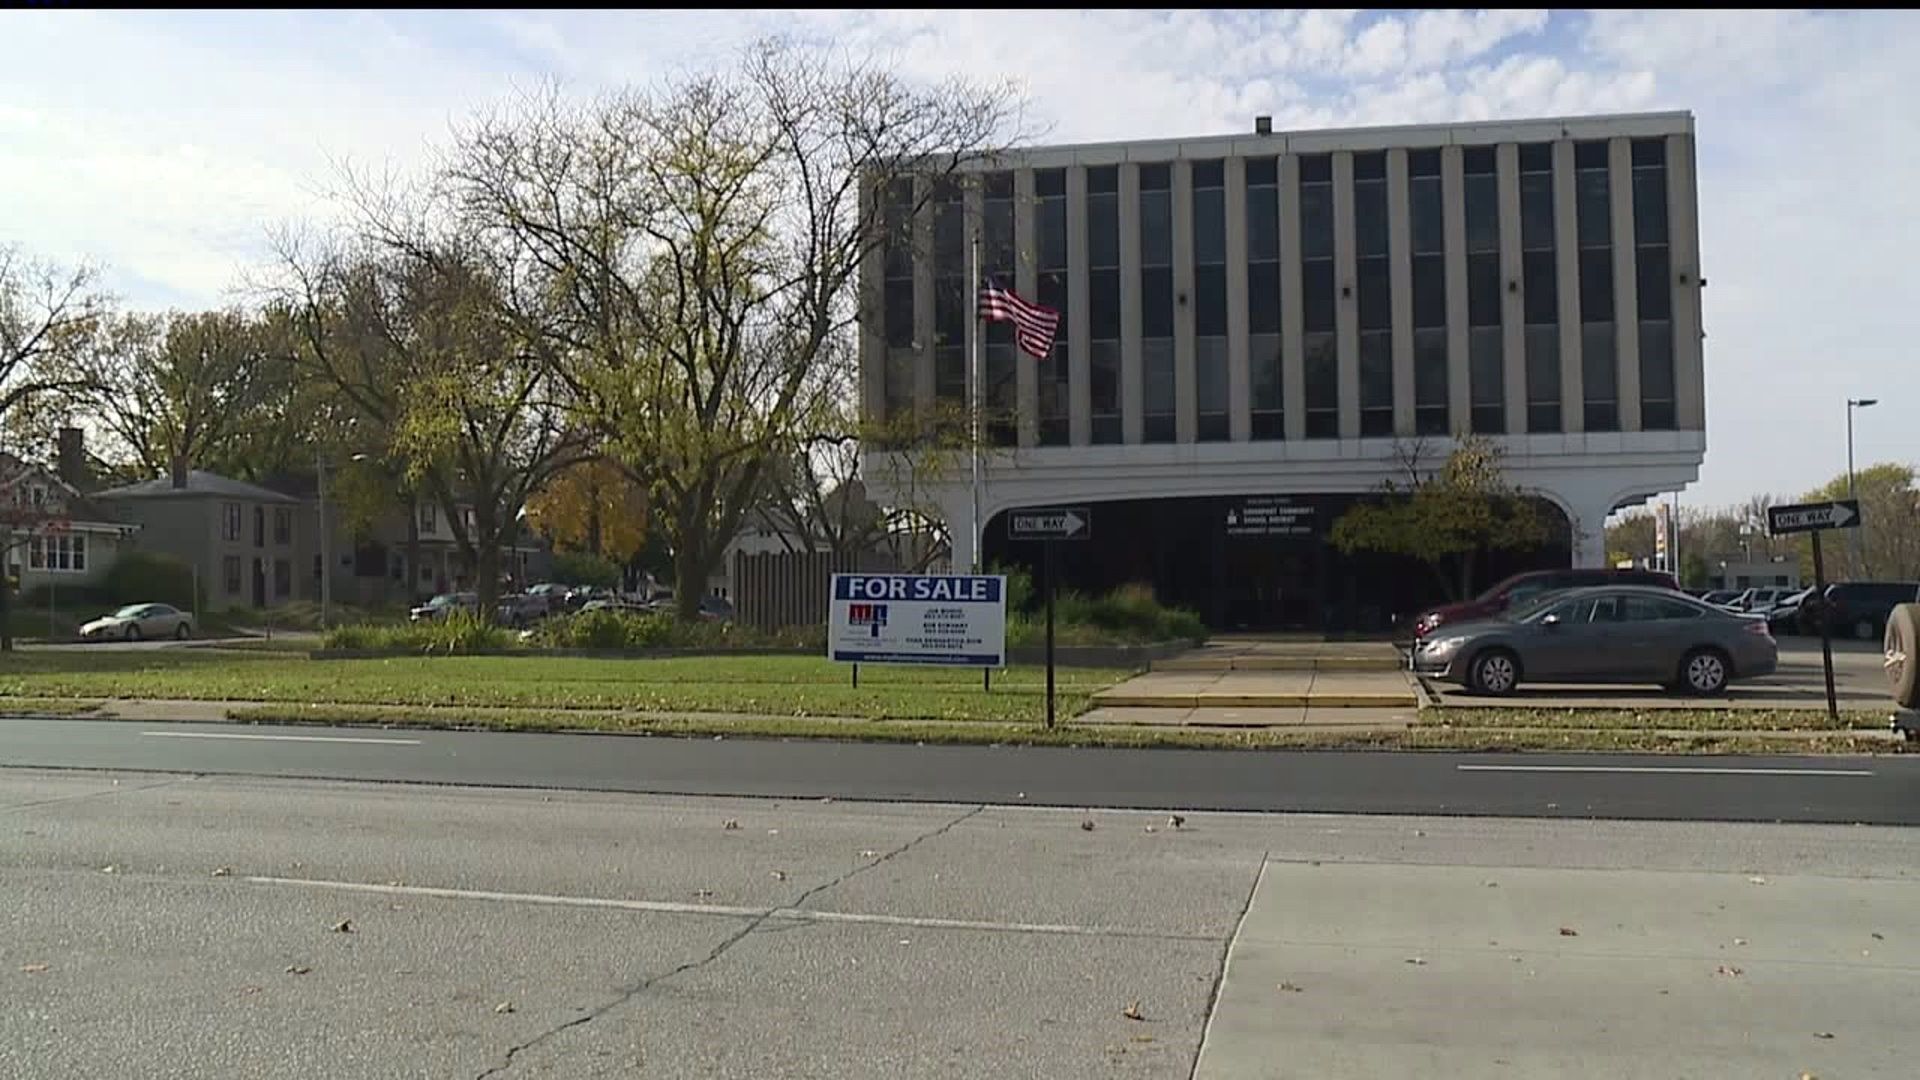 Davenport board approves sale of two buildings